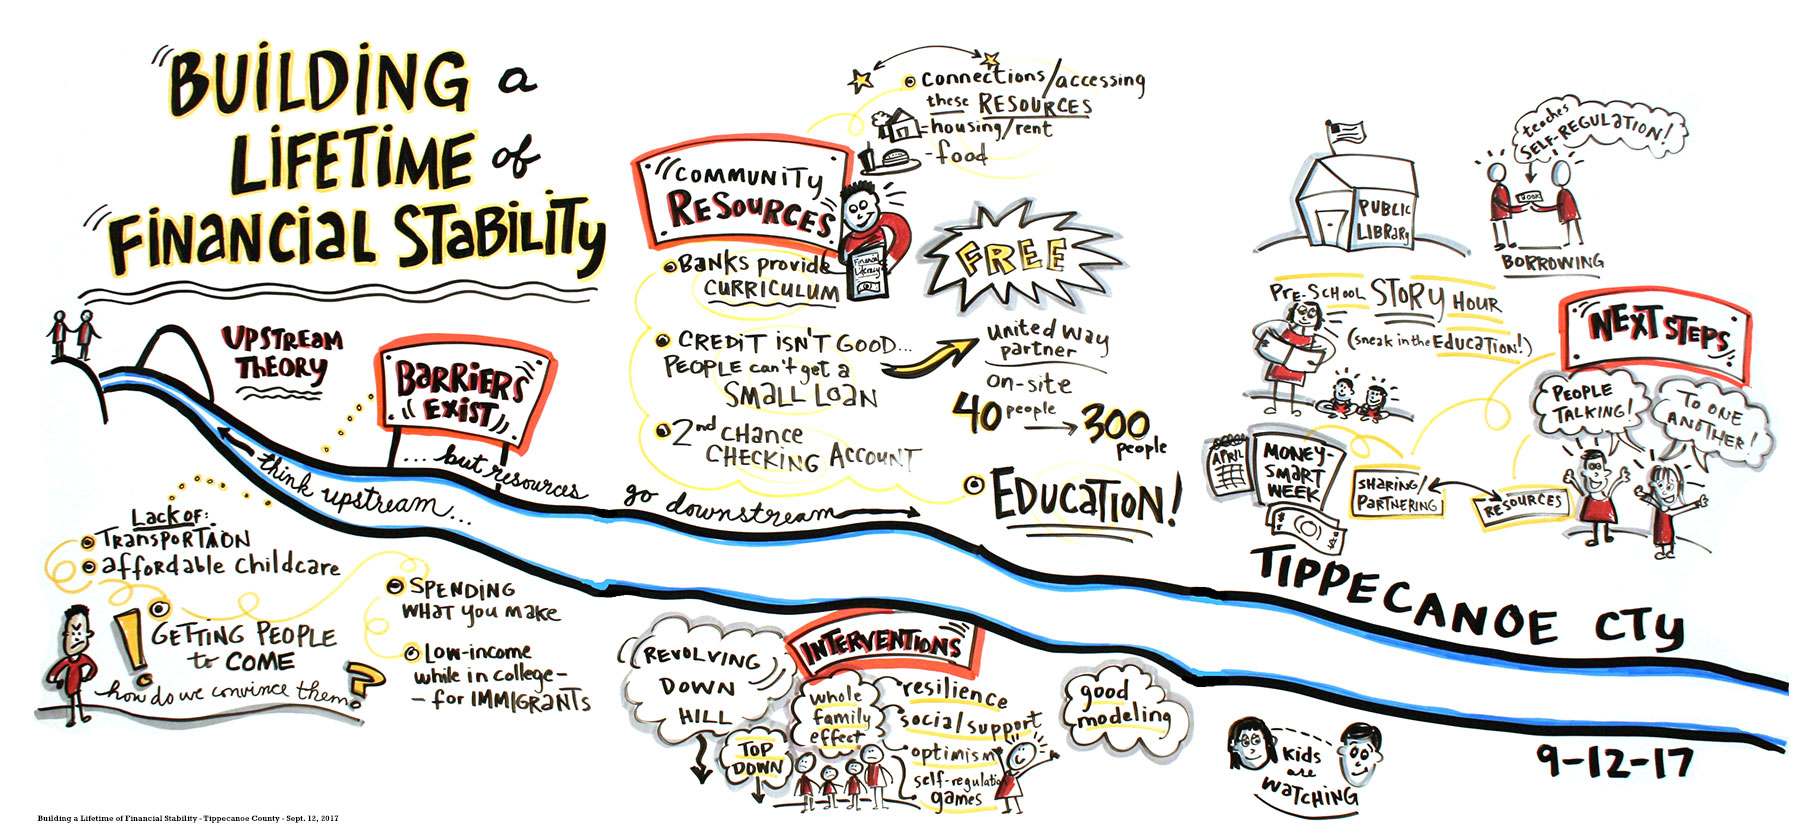 Graphic Recording Building a Lifetime of Financial Stability